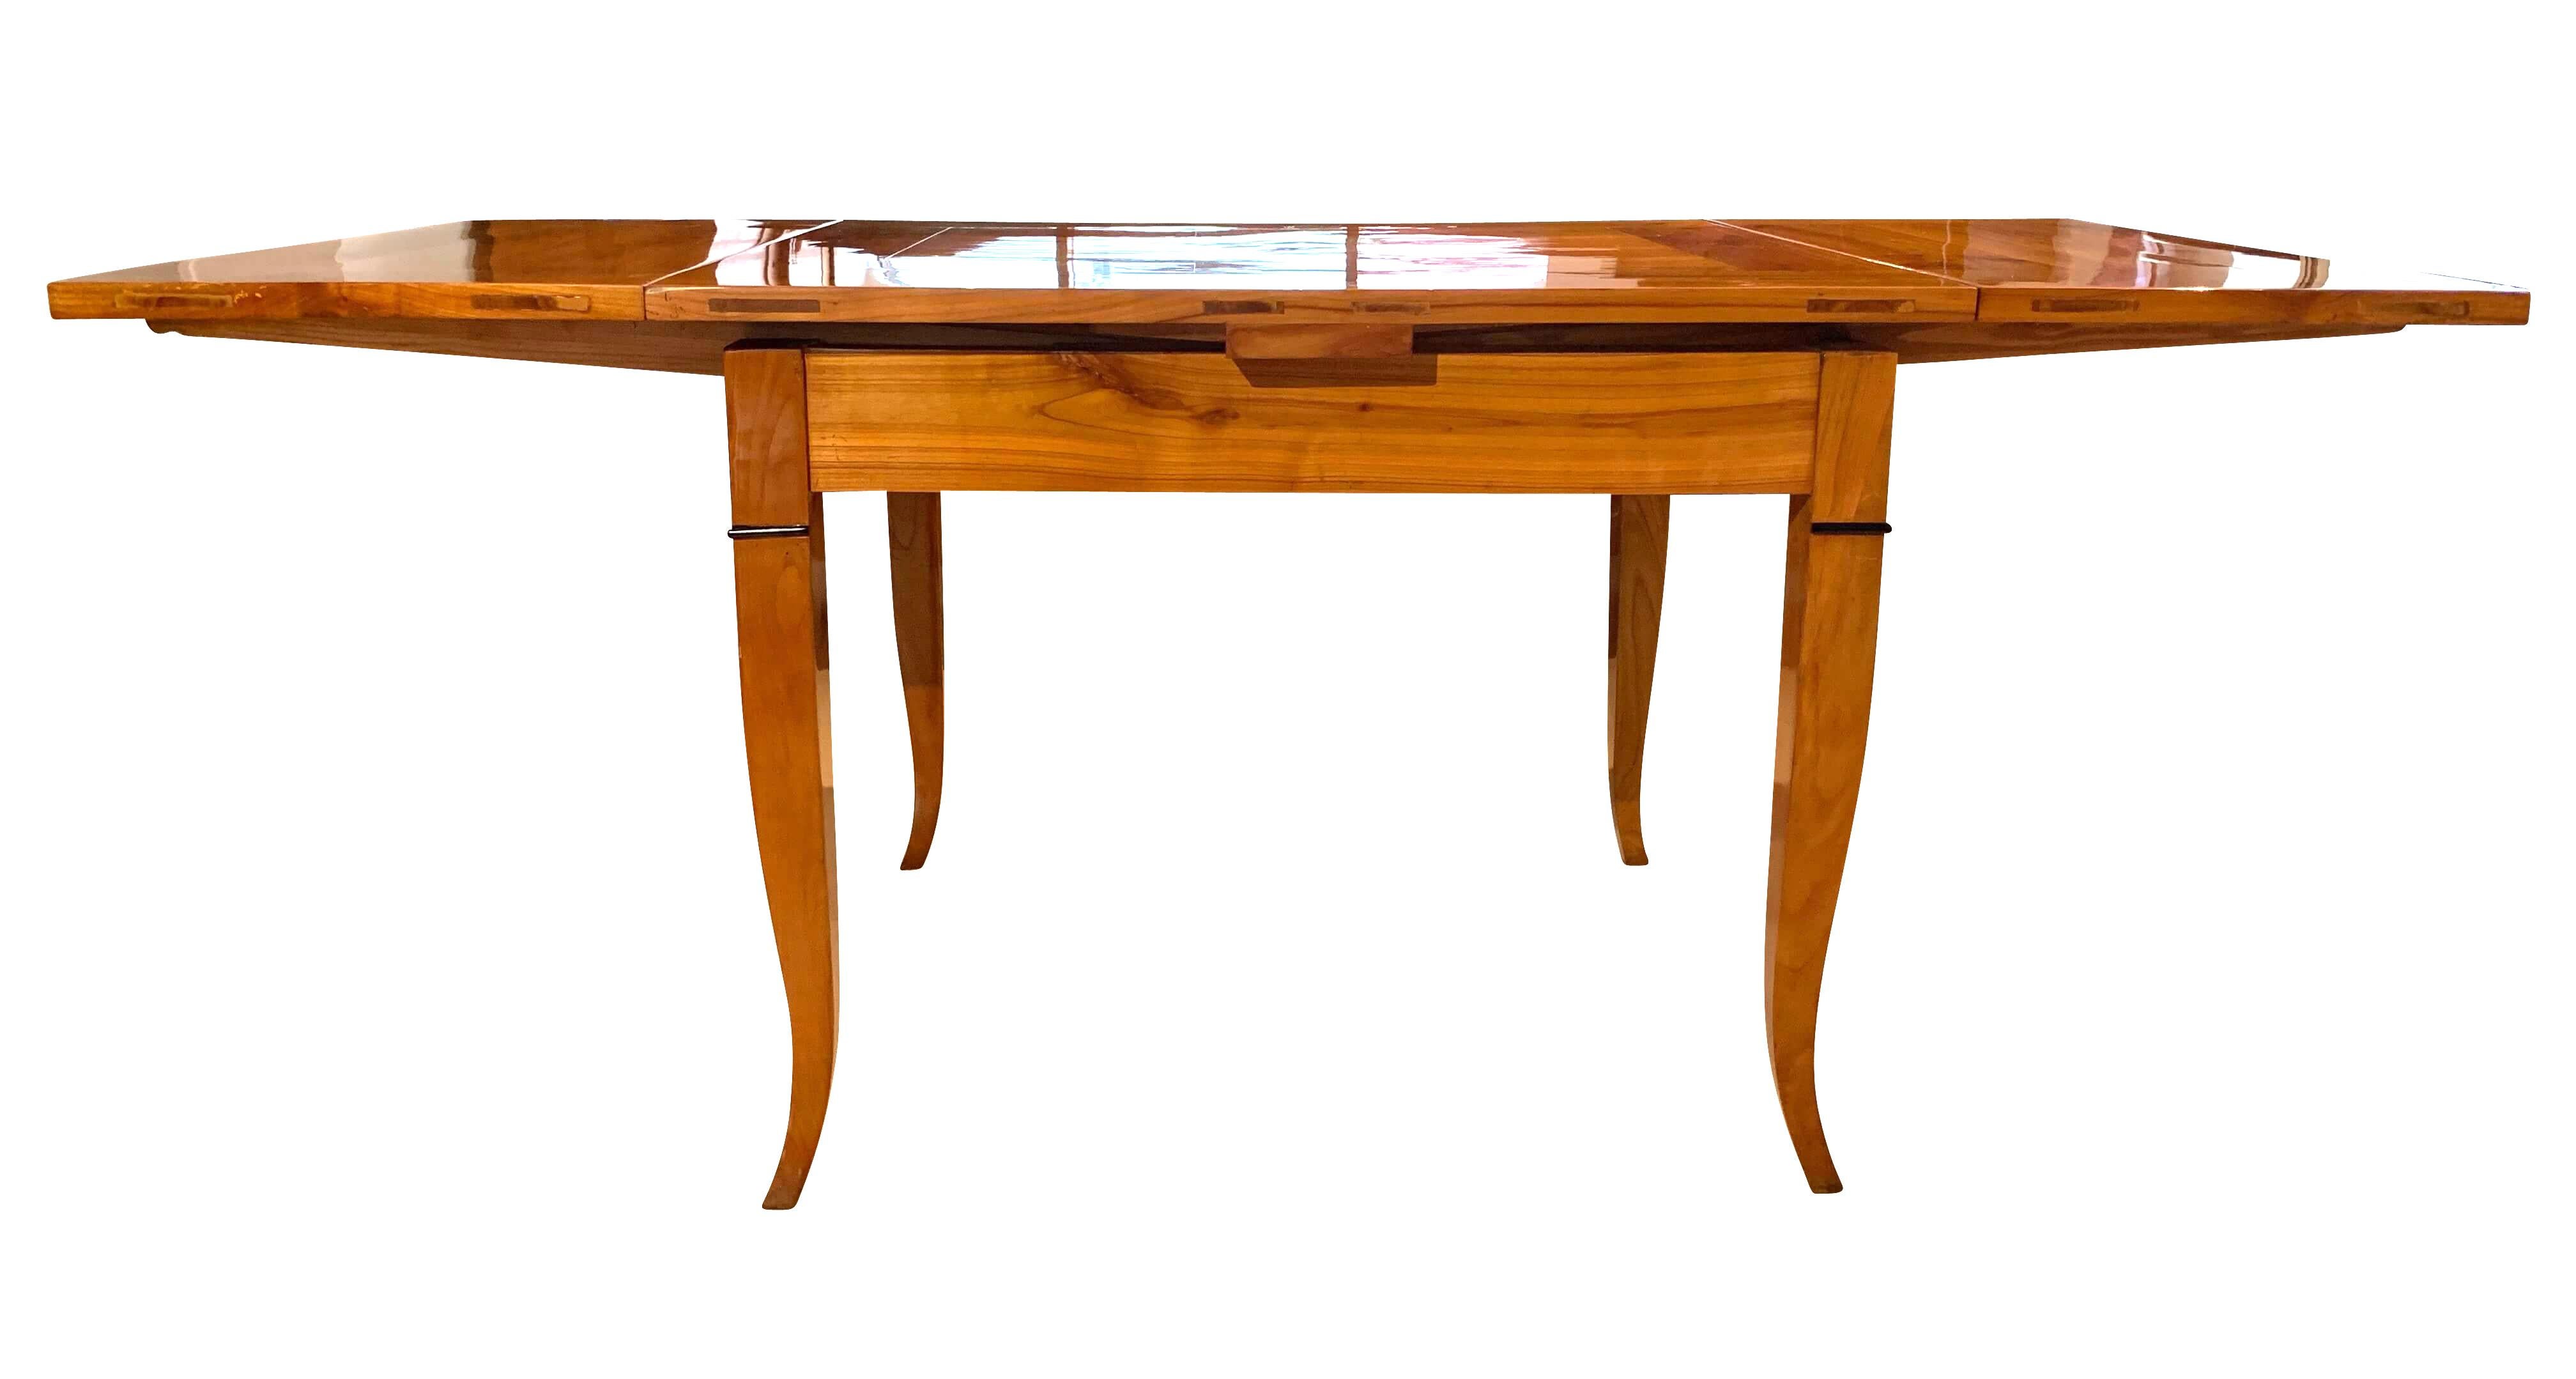 Nice rectangular expandable Biedermeier table from South Germany, circa 1820.

Classic model with curved legs and ebonized parts. The extending plates can be pushed underneath the main plate. It is possible to expand 1 or 2 plates. Each plate is